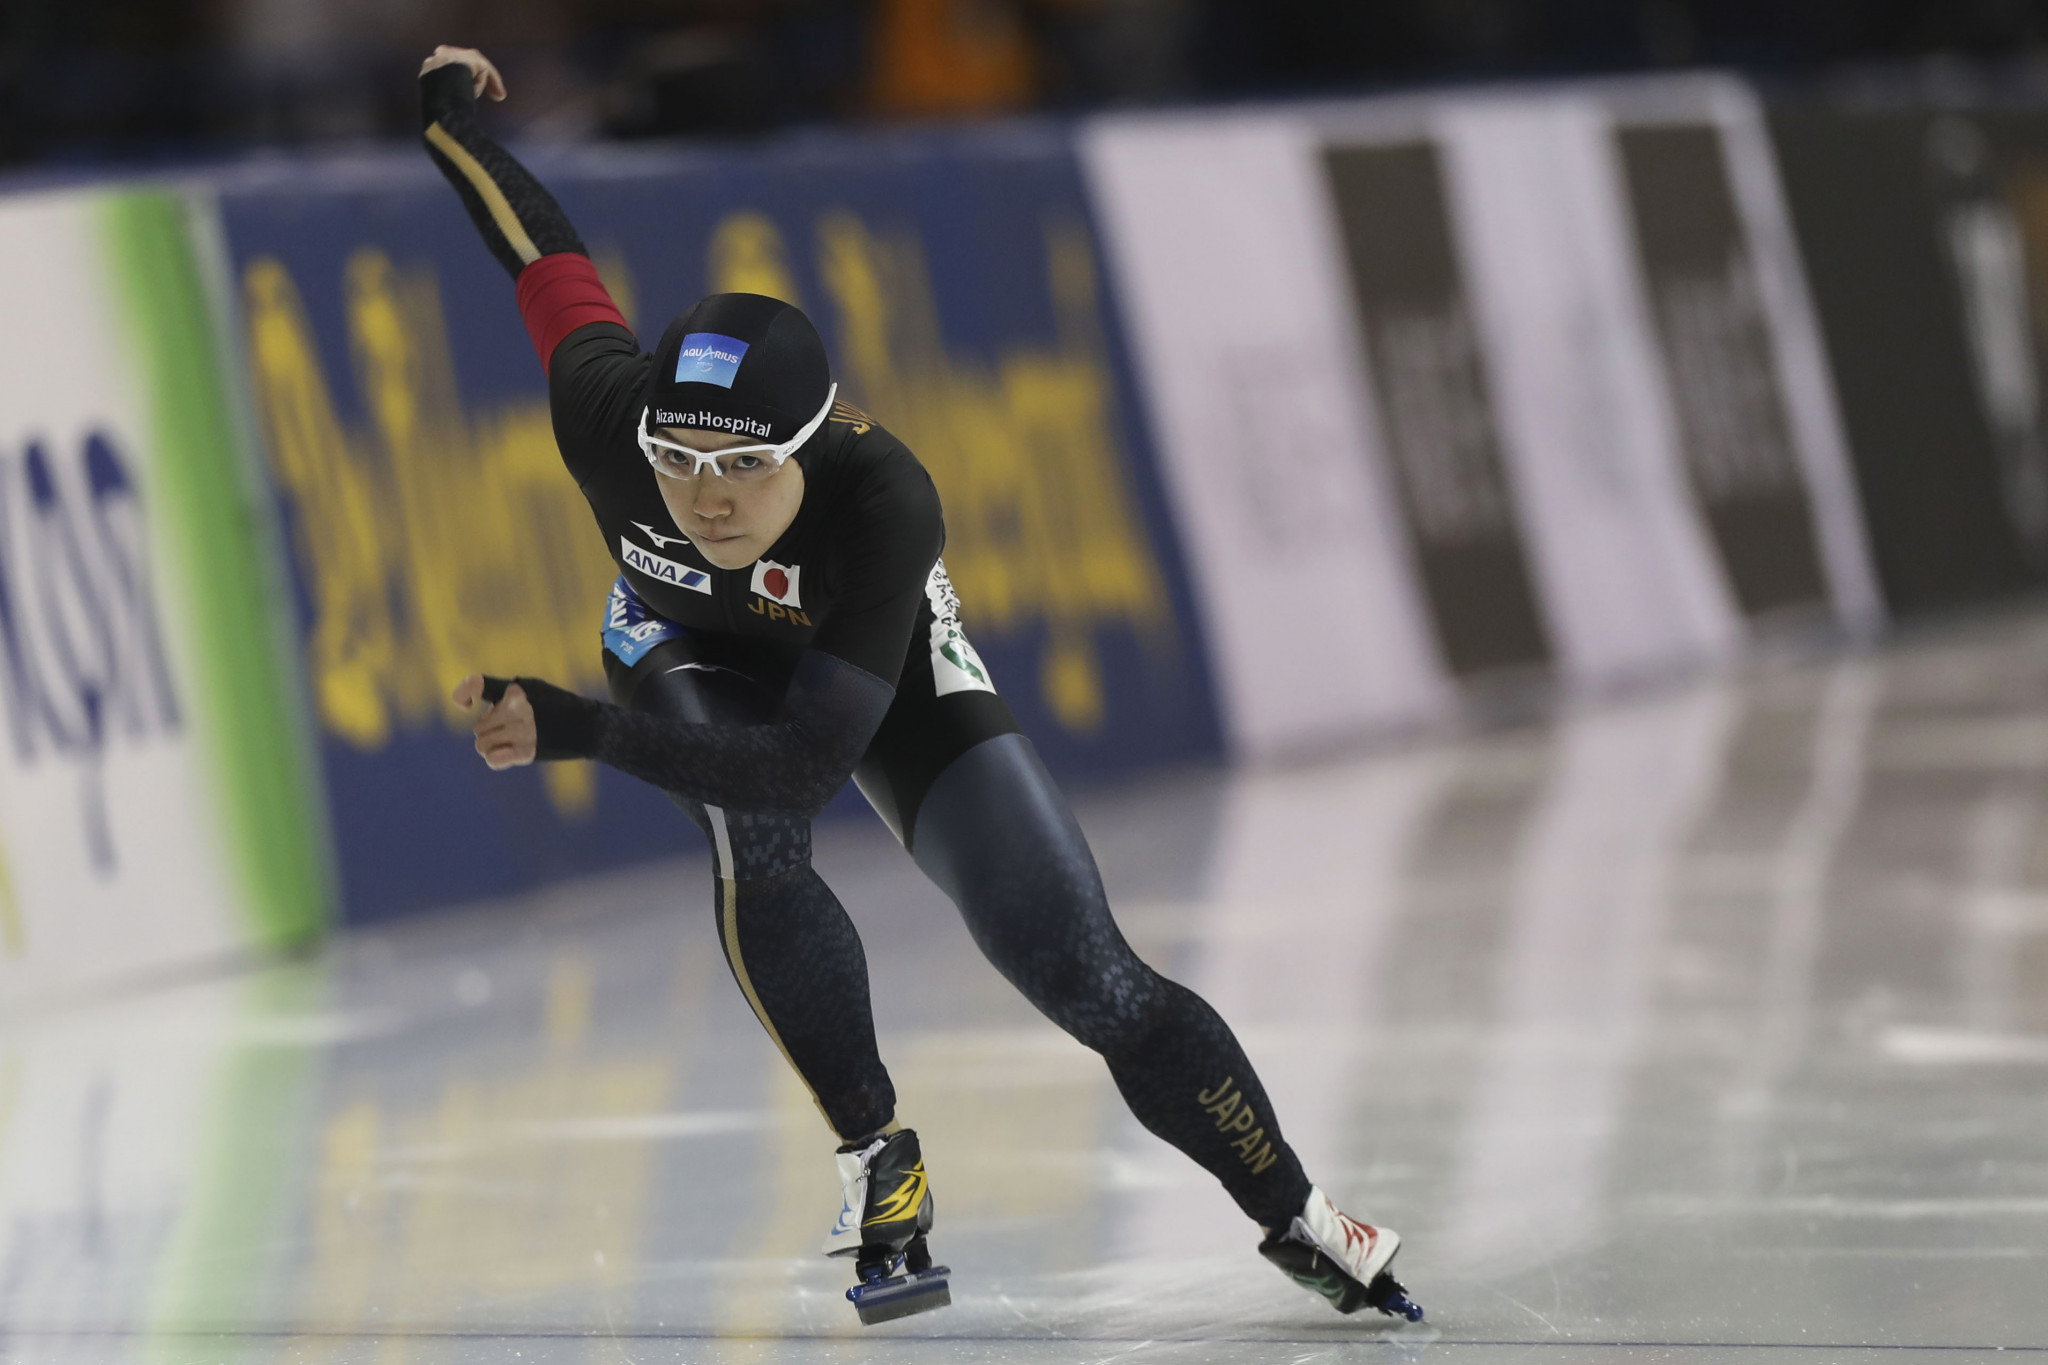 Olympic 500m champions hold advantage at halfway stage of World Sprint Speed Skating Championships